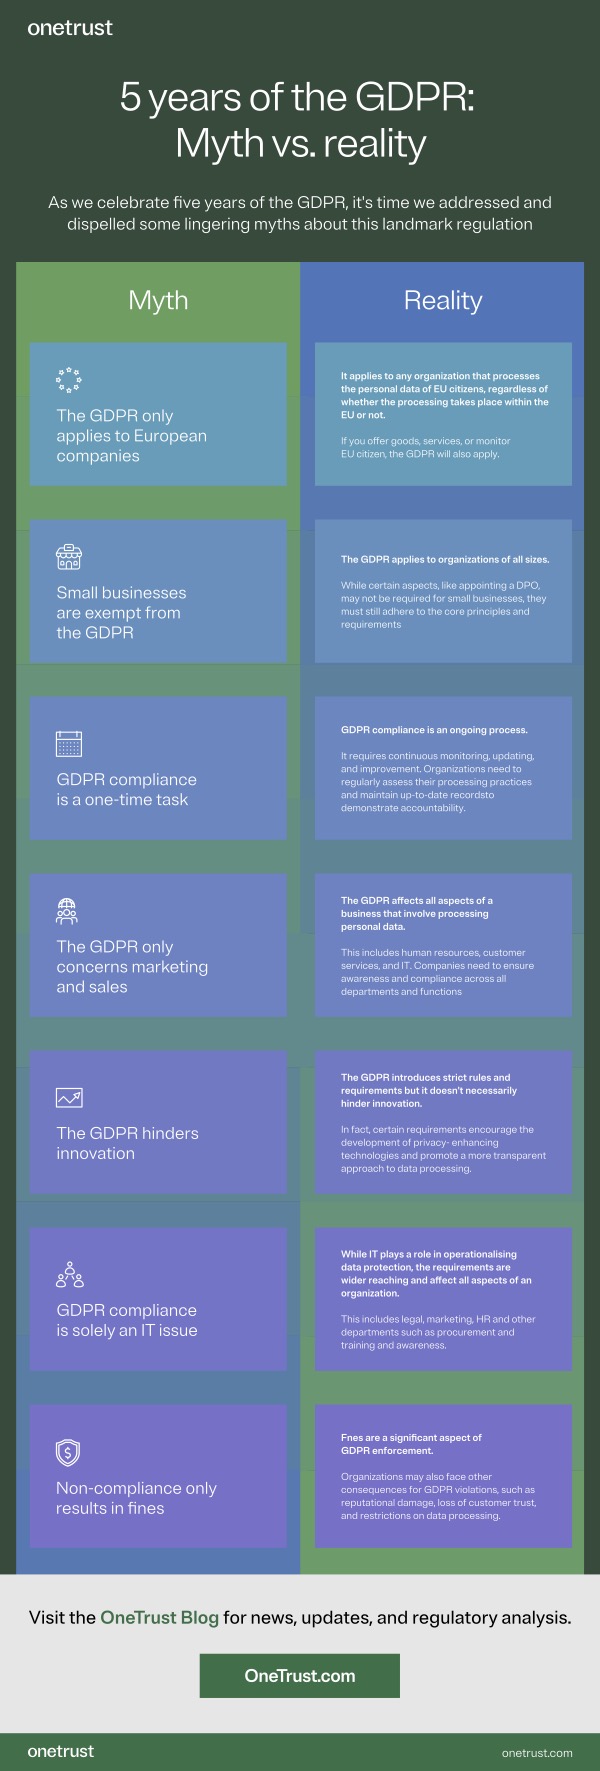 Infographic breaking down common myths of the GDPR and what the law actually does.